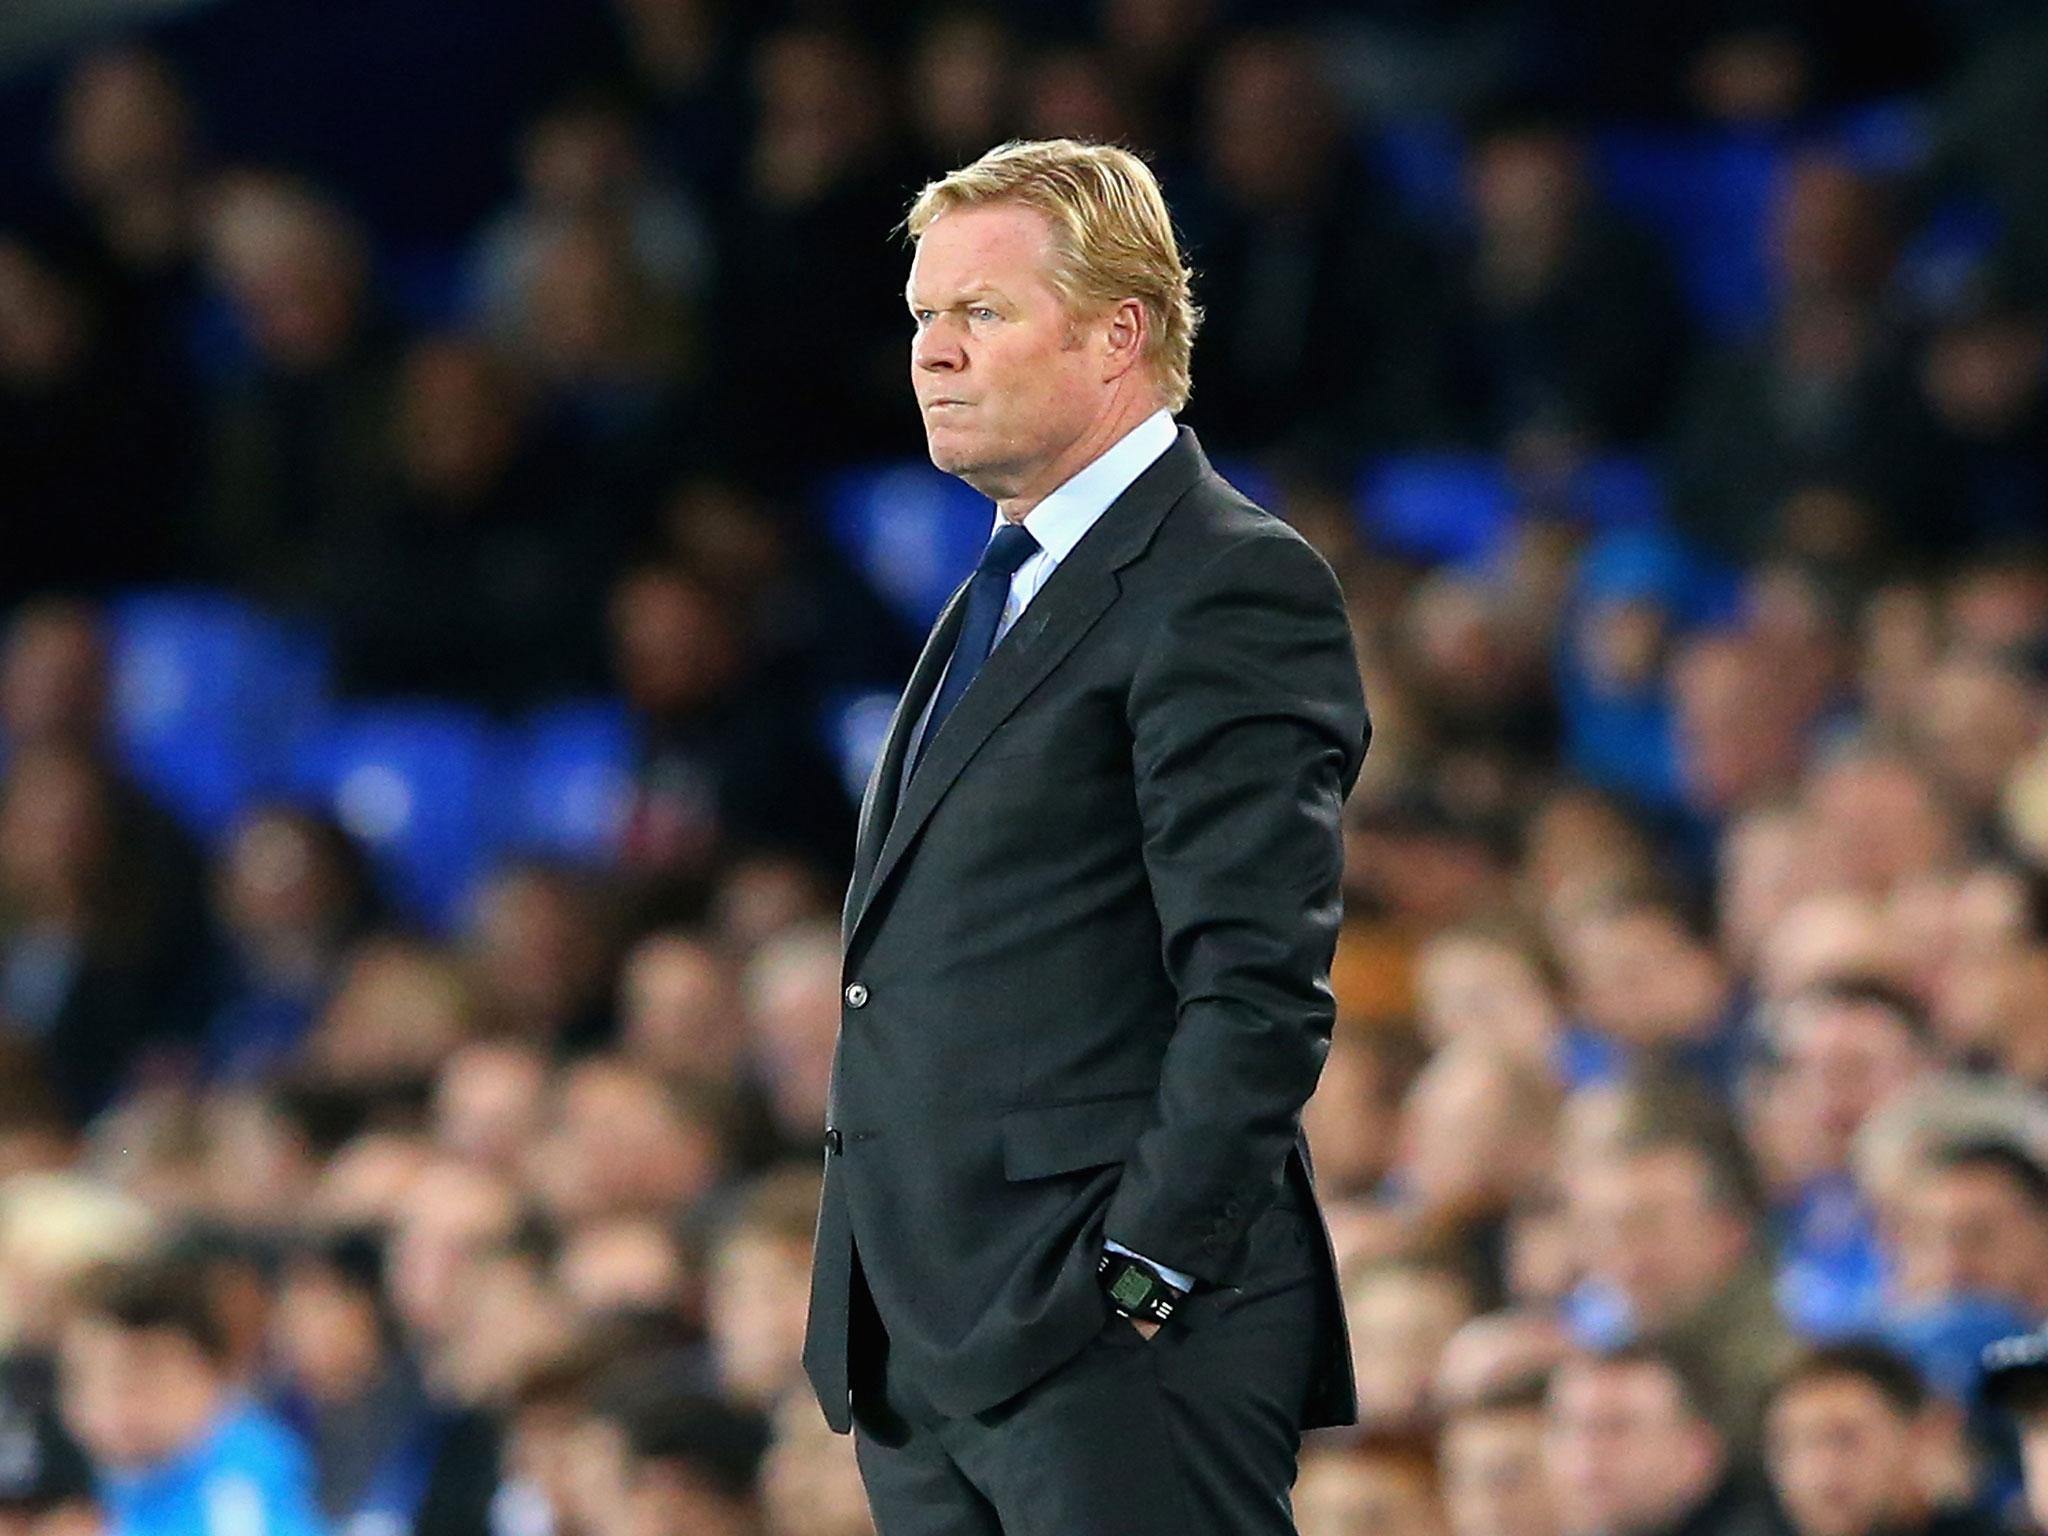 The Dutchman was sacked following Everton's 5-2 defeat by Arsenal